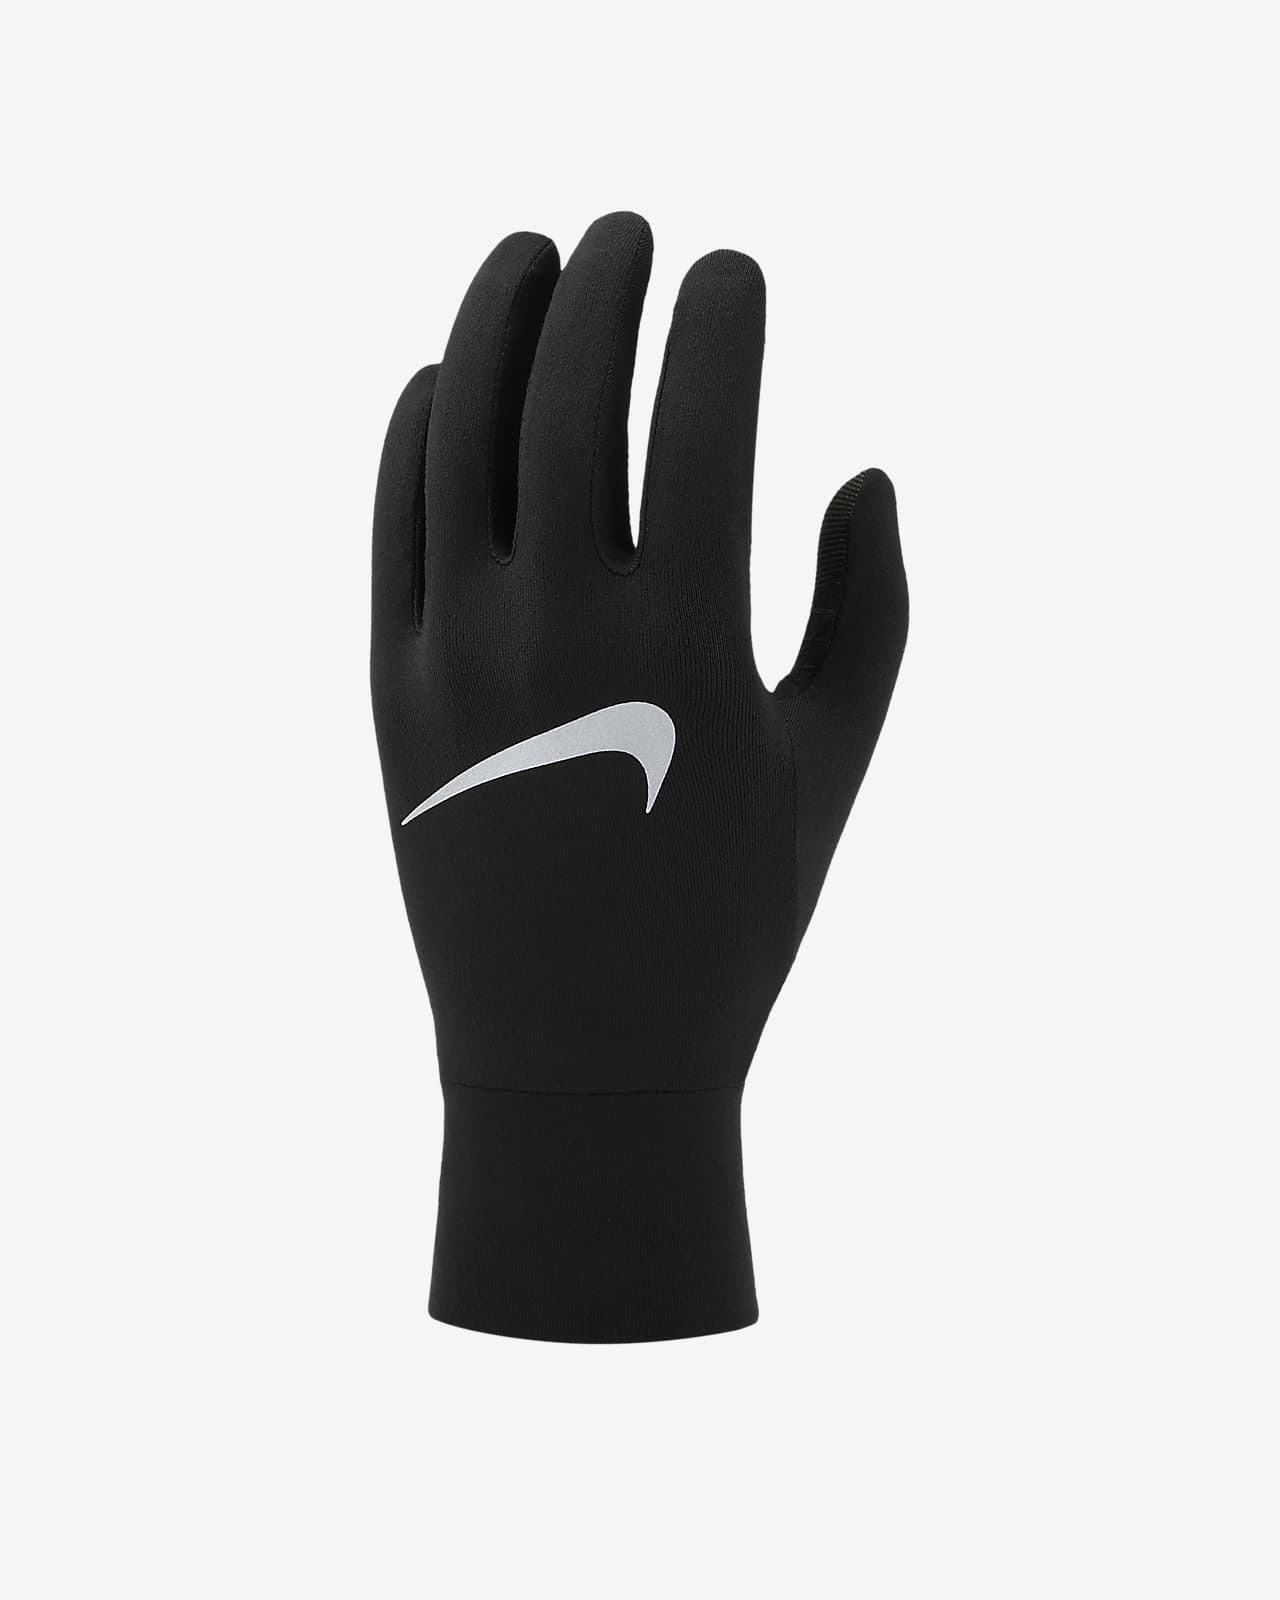 nike scarf and gloves